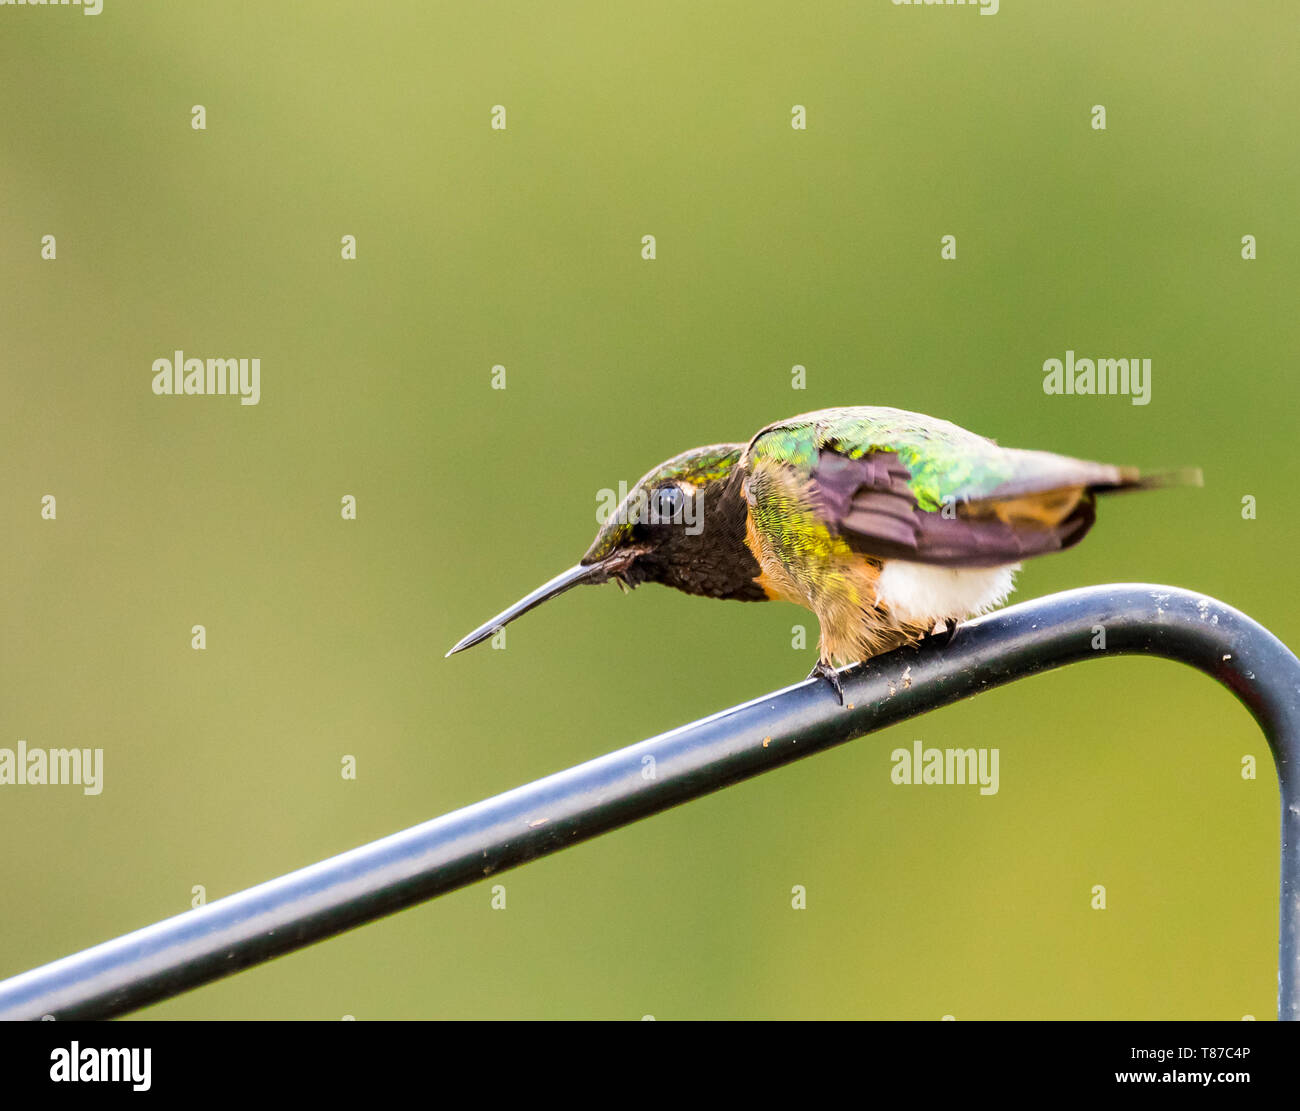 Male Ruby-Throated Hummingbird in threatening stance to scare away another hummingbird. Stock Photo